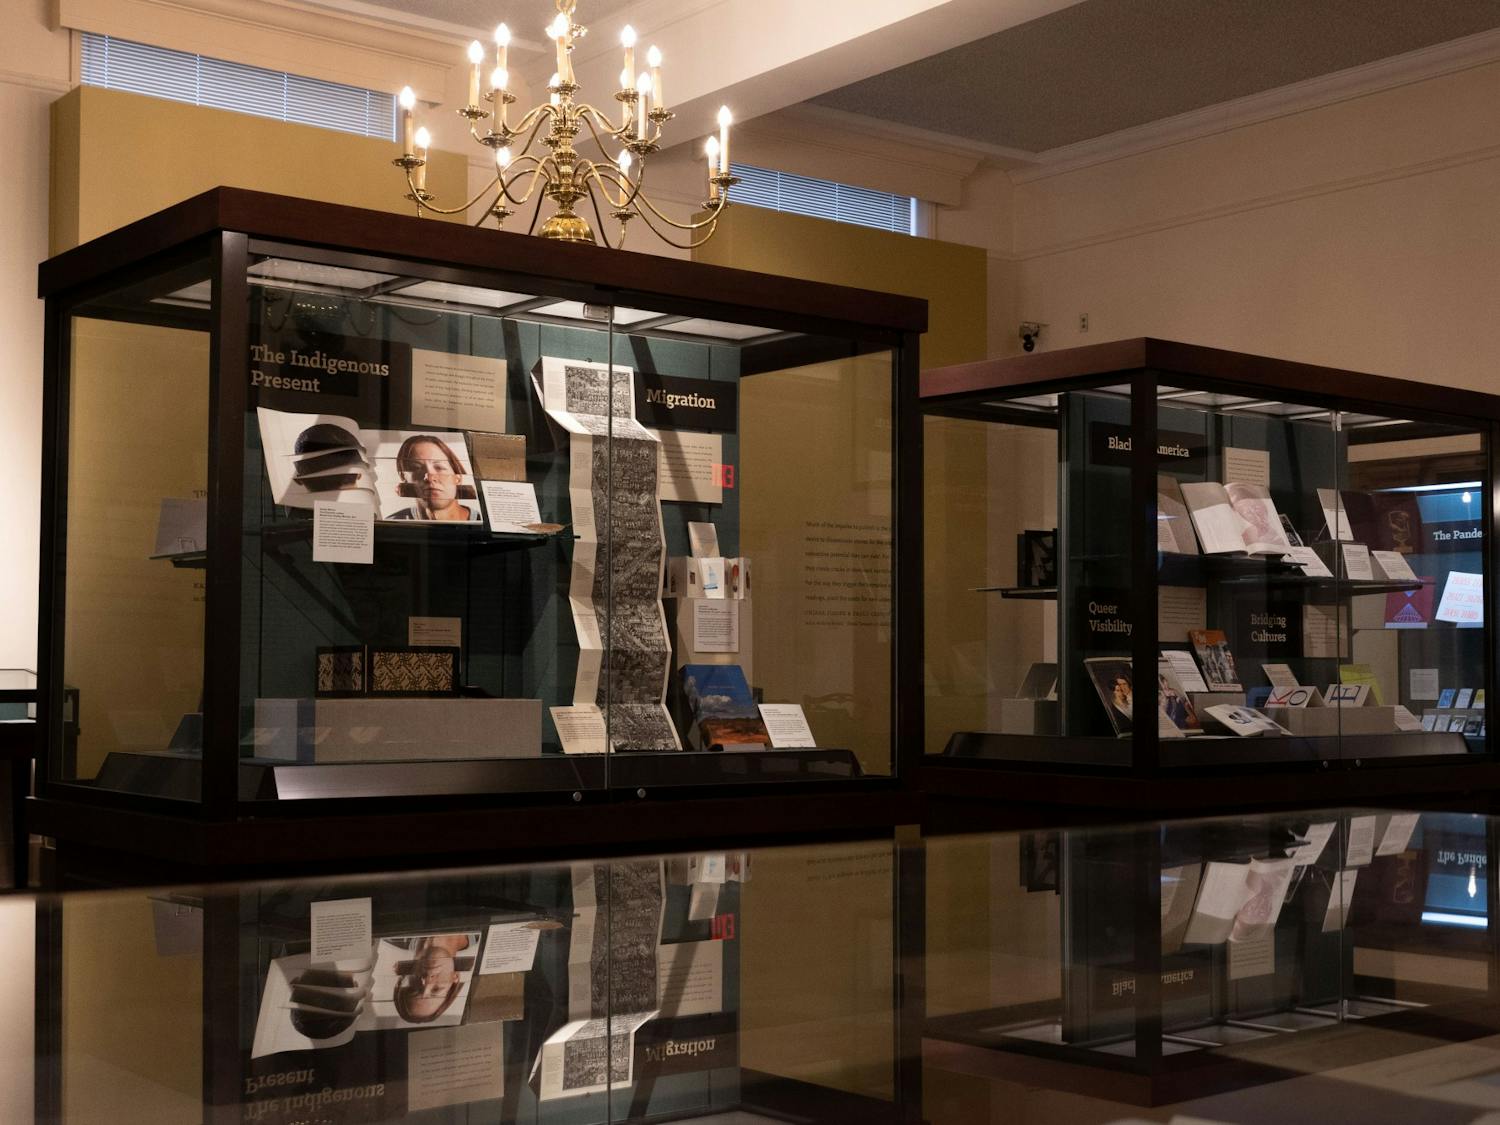 Wilson Library's current exhibition, 'Every Book a Mirror,' confronts present-day social issues through artists' books and zines from the Sloane Art Library's collection. The exhibit, housed in Wilson Library's Special Collections room, is photographed on Wednesday, Jan. 25, 2023.